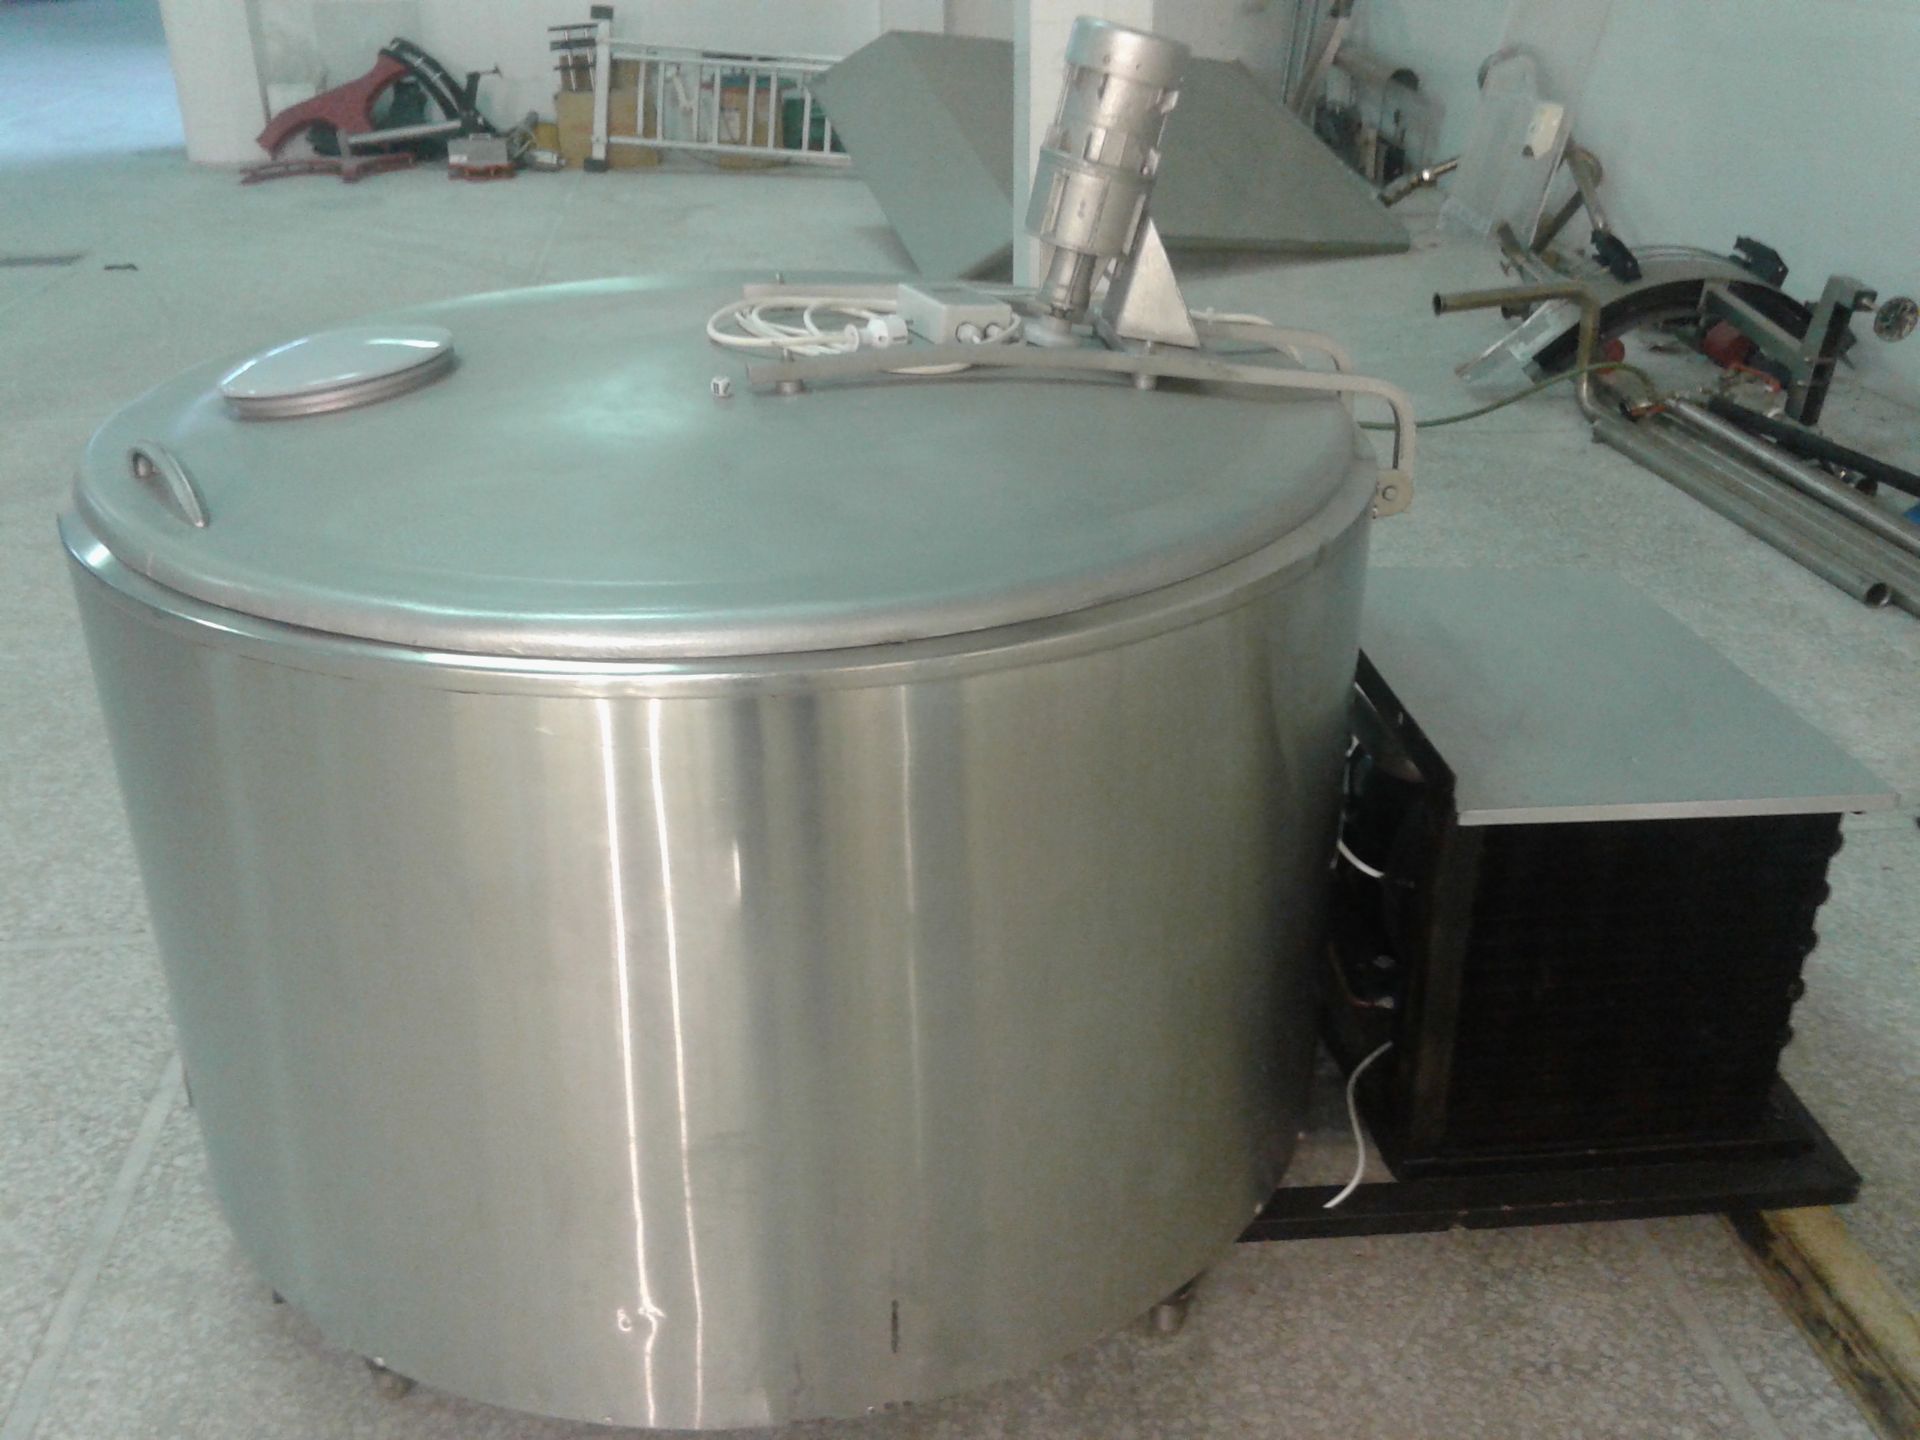 JAPY 650 Liter Milk Cooling Tank, Model 650, Equipped with Top Mount Prop Agitation, On-Board Compr